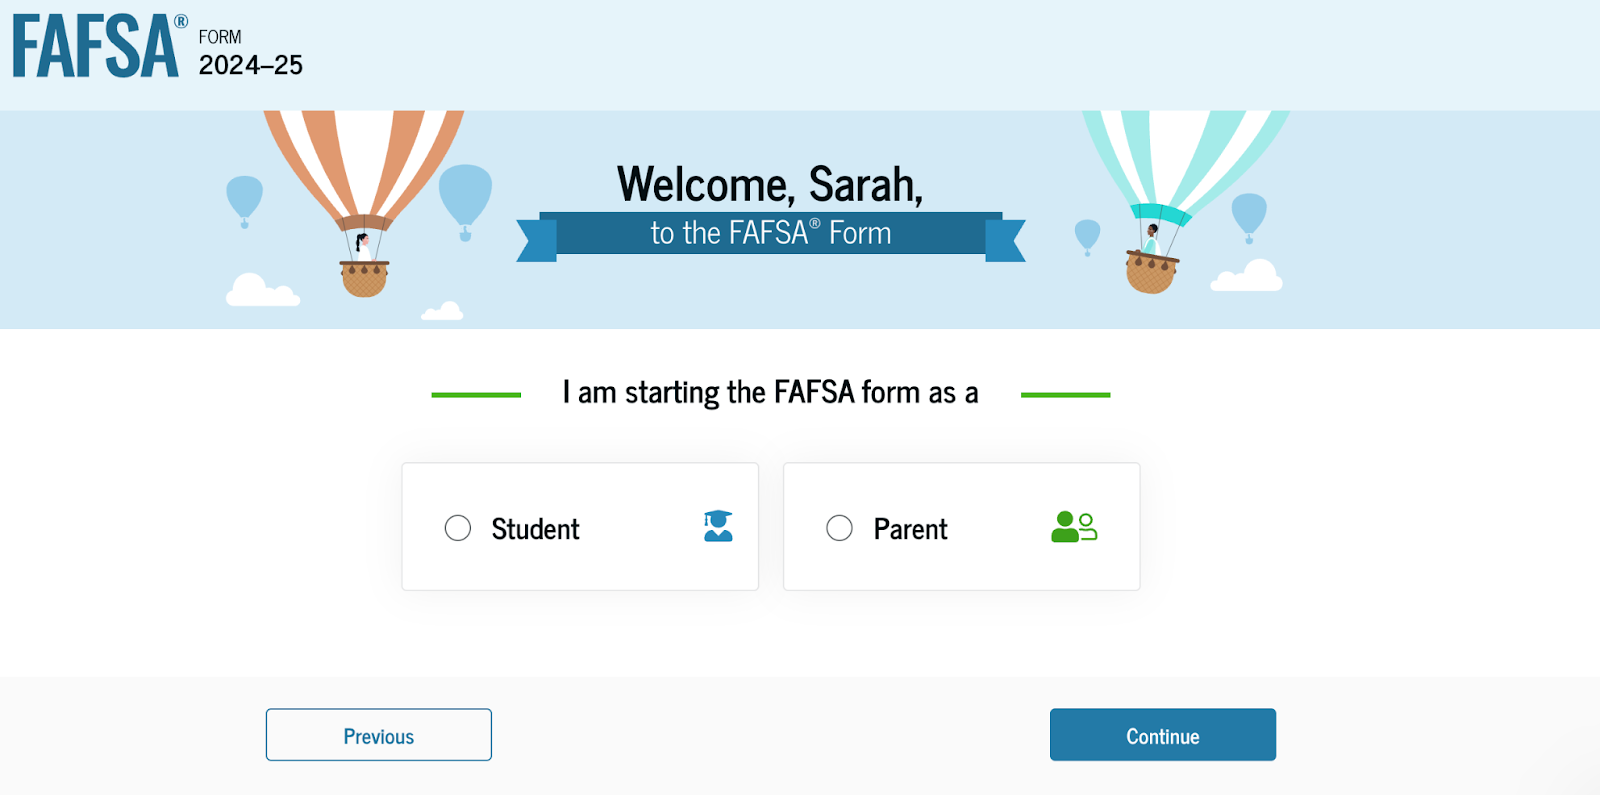 A screenshot of a FAFSA form inquiring whether the student or parent is completing the FAFSA.